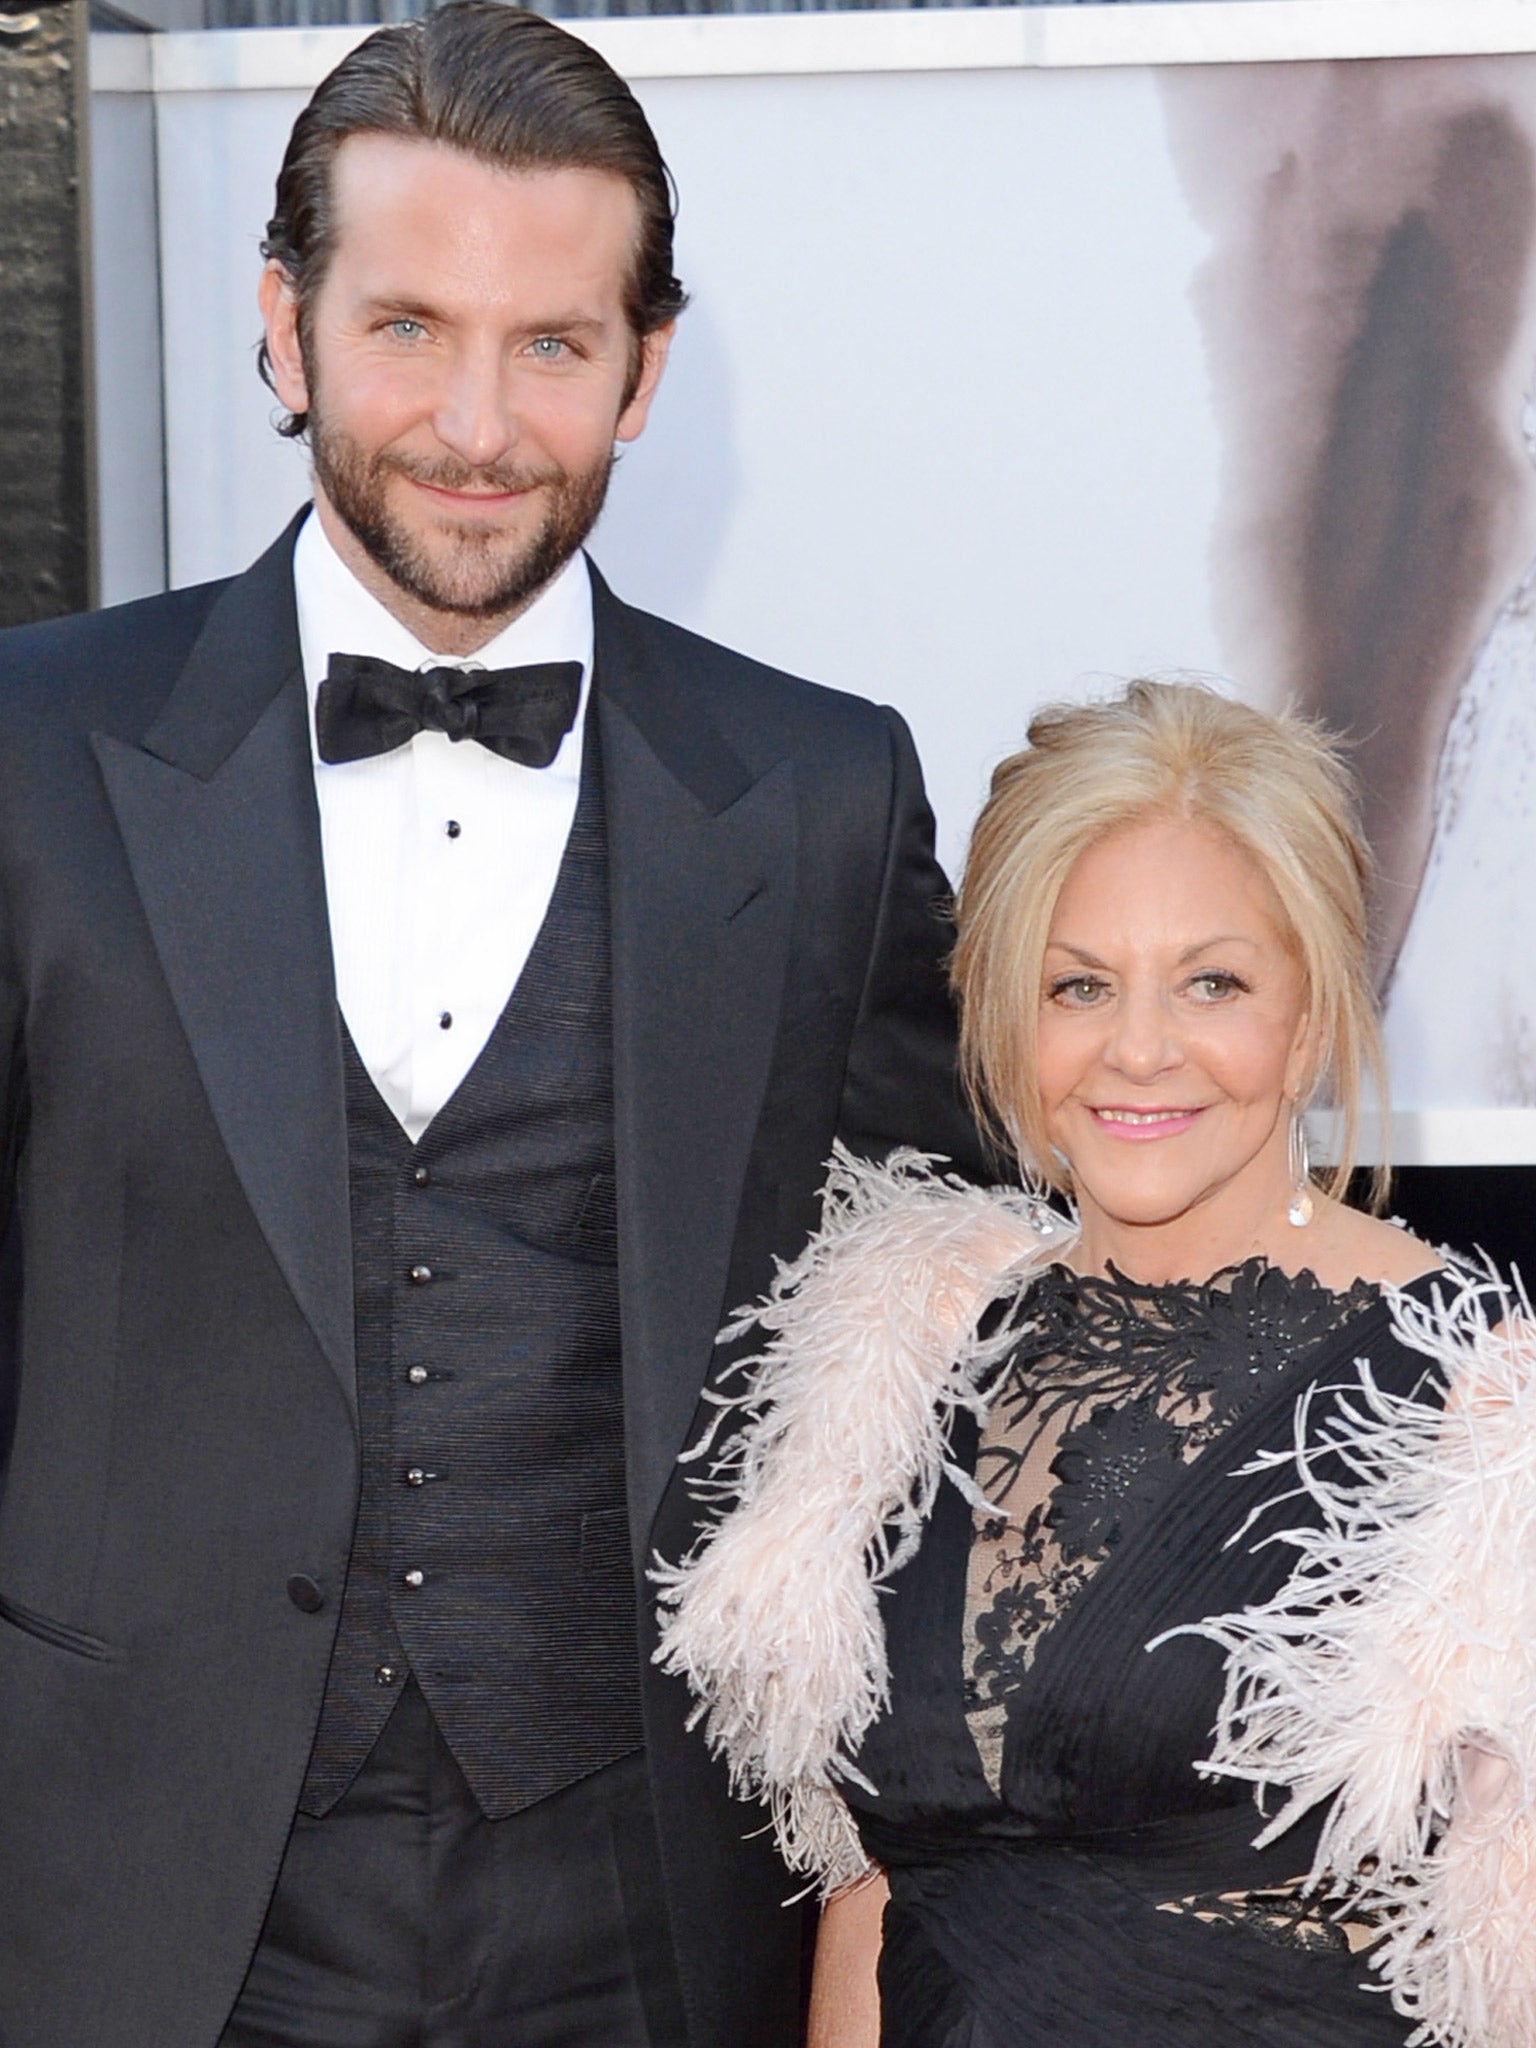 Bradley Cooper and mother Gloria Cooper arriving at the Oscars earlier this year